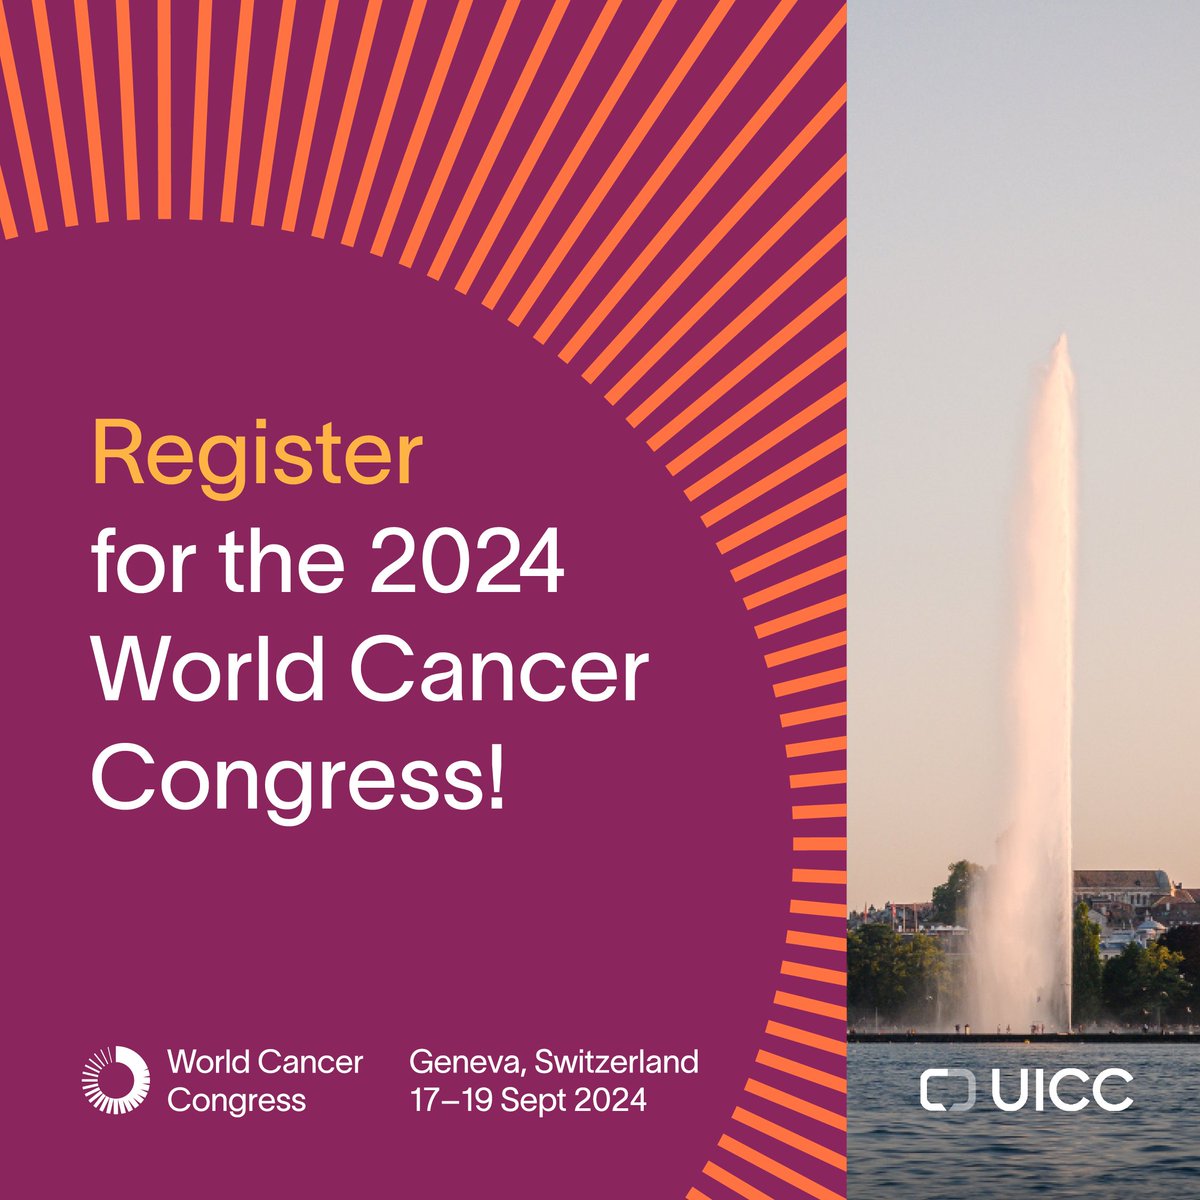 Register for the 2024 #WorldCancerCongress! The Congress will convene in Geneva in September, and give the global cancer community the chance to discuss the latest innovations, and exchange ideas on equity in cancer care.

➡️ worldcancercongress.org

#WCC2024